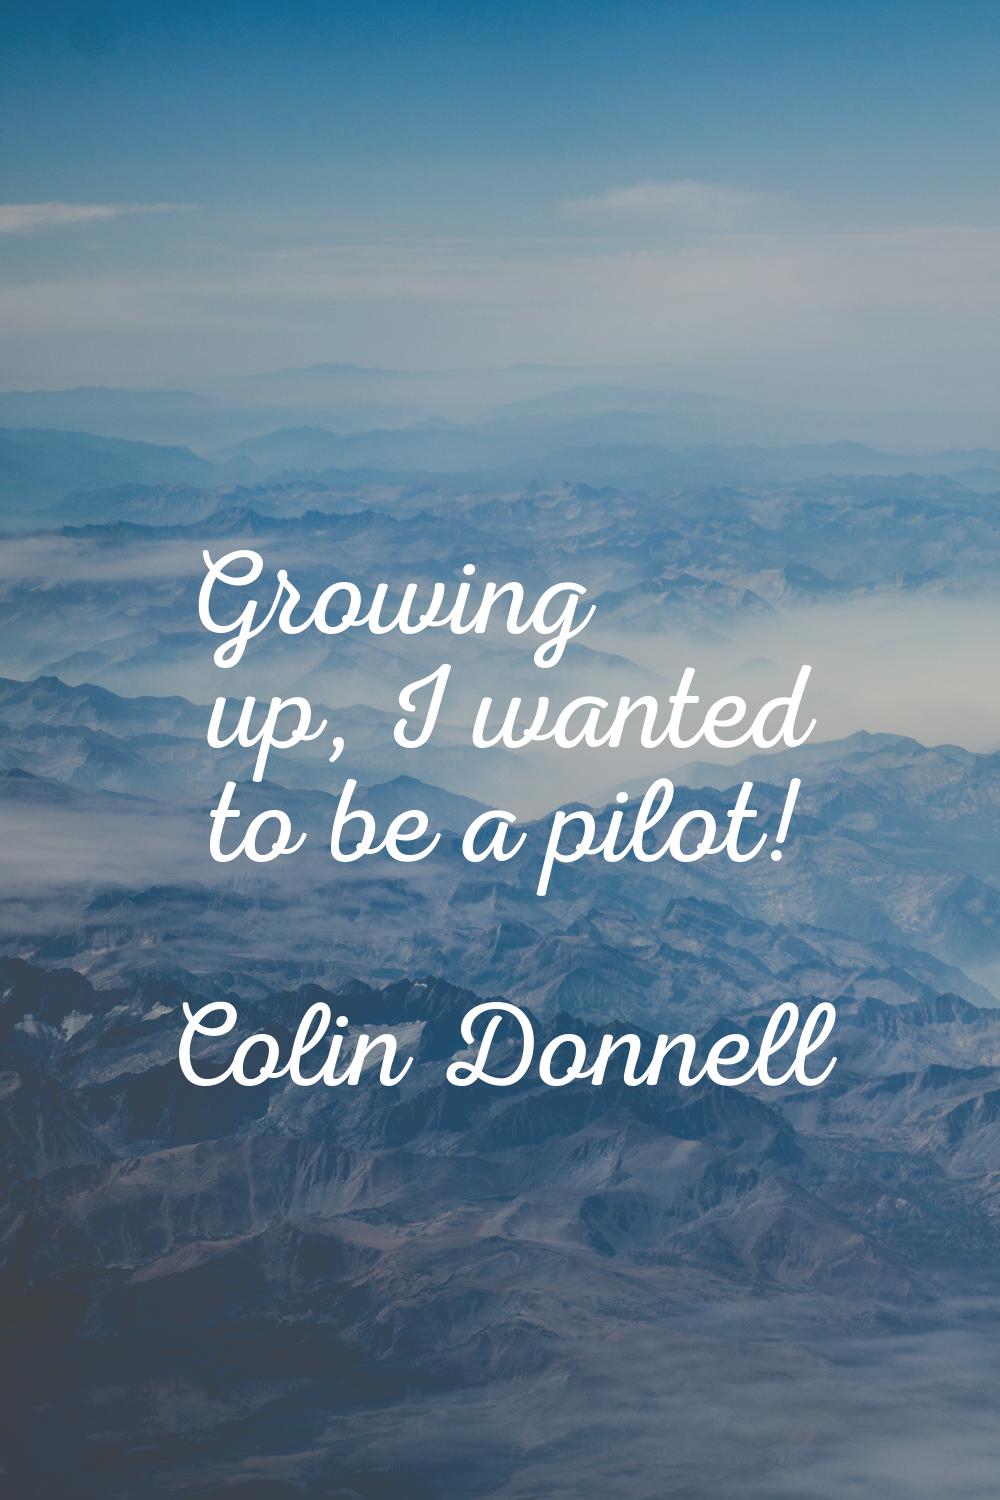 Growing up, I wanted to be a pilot!